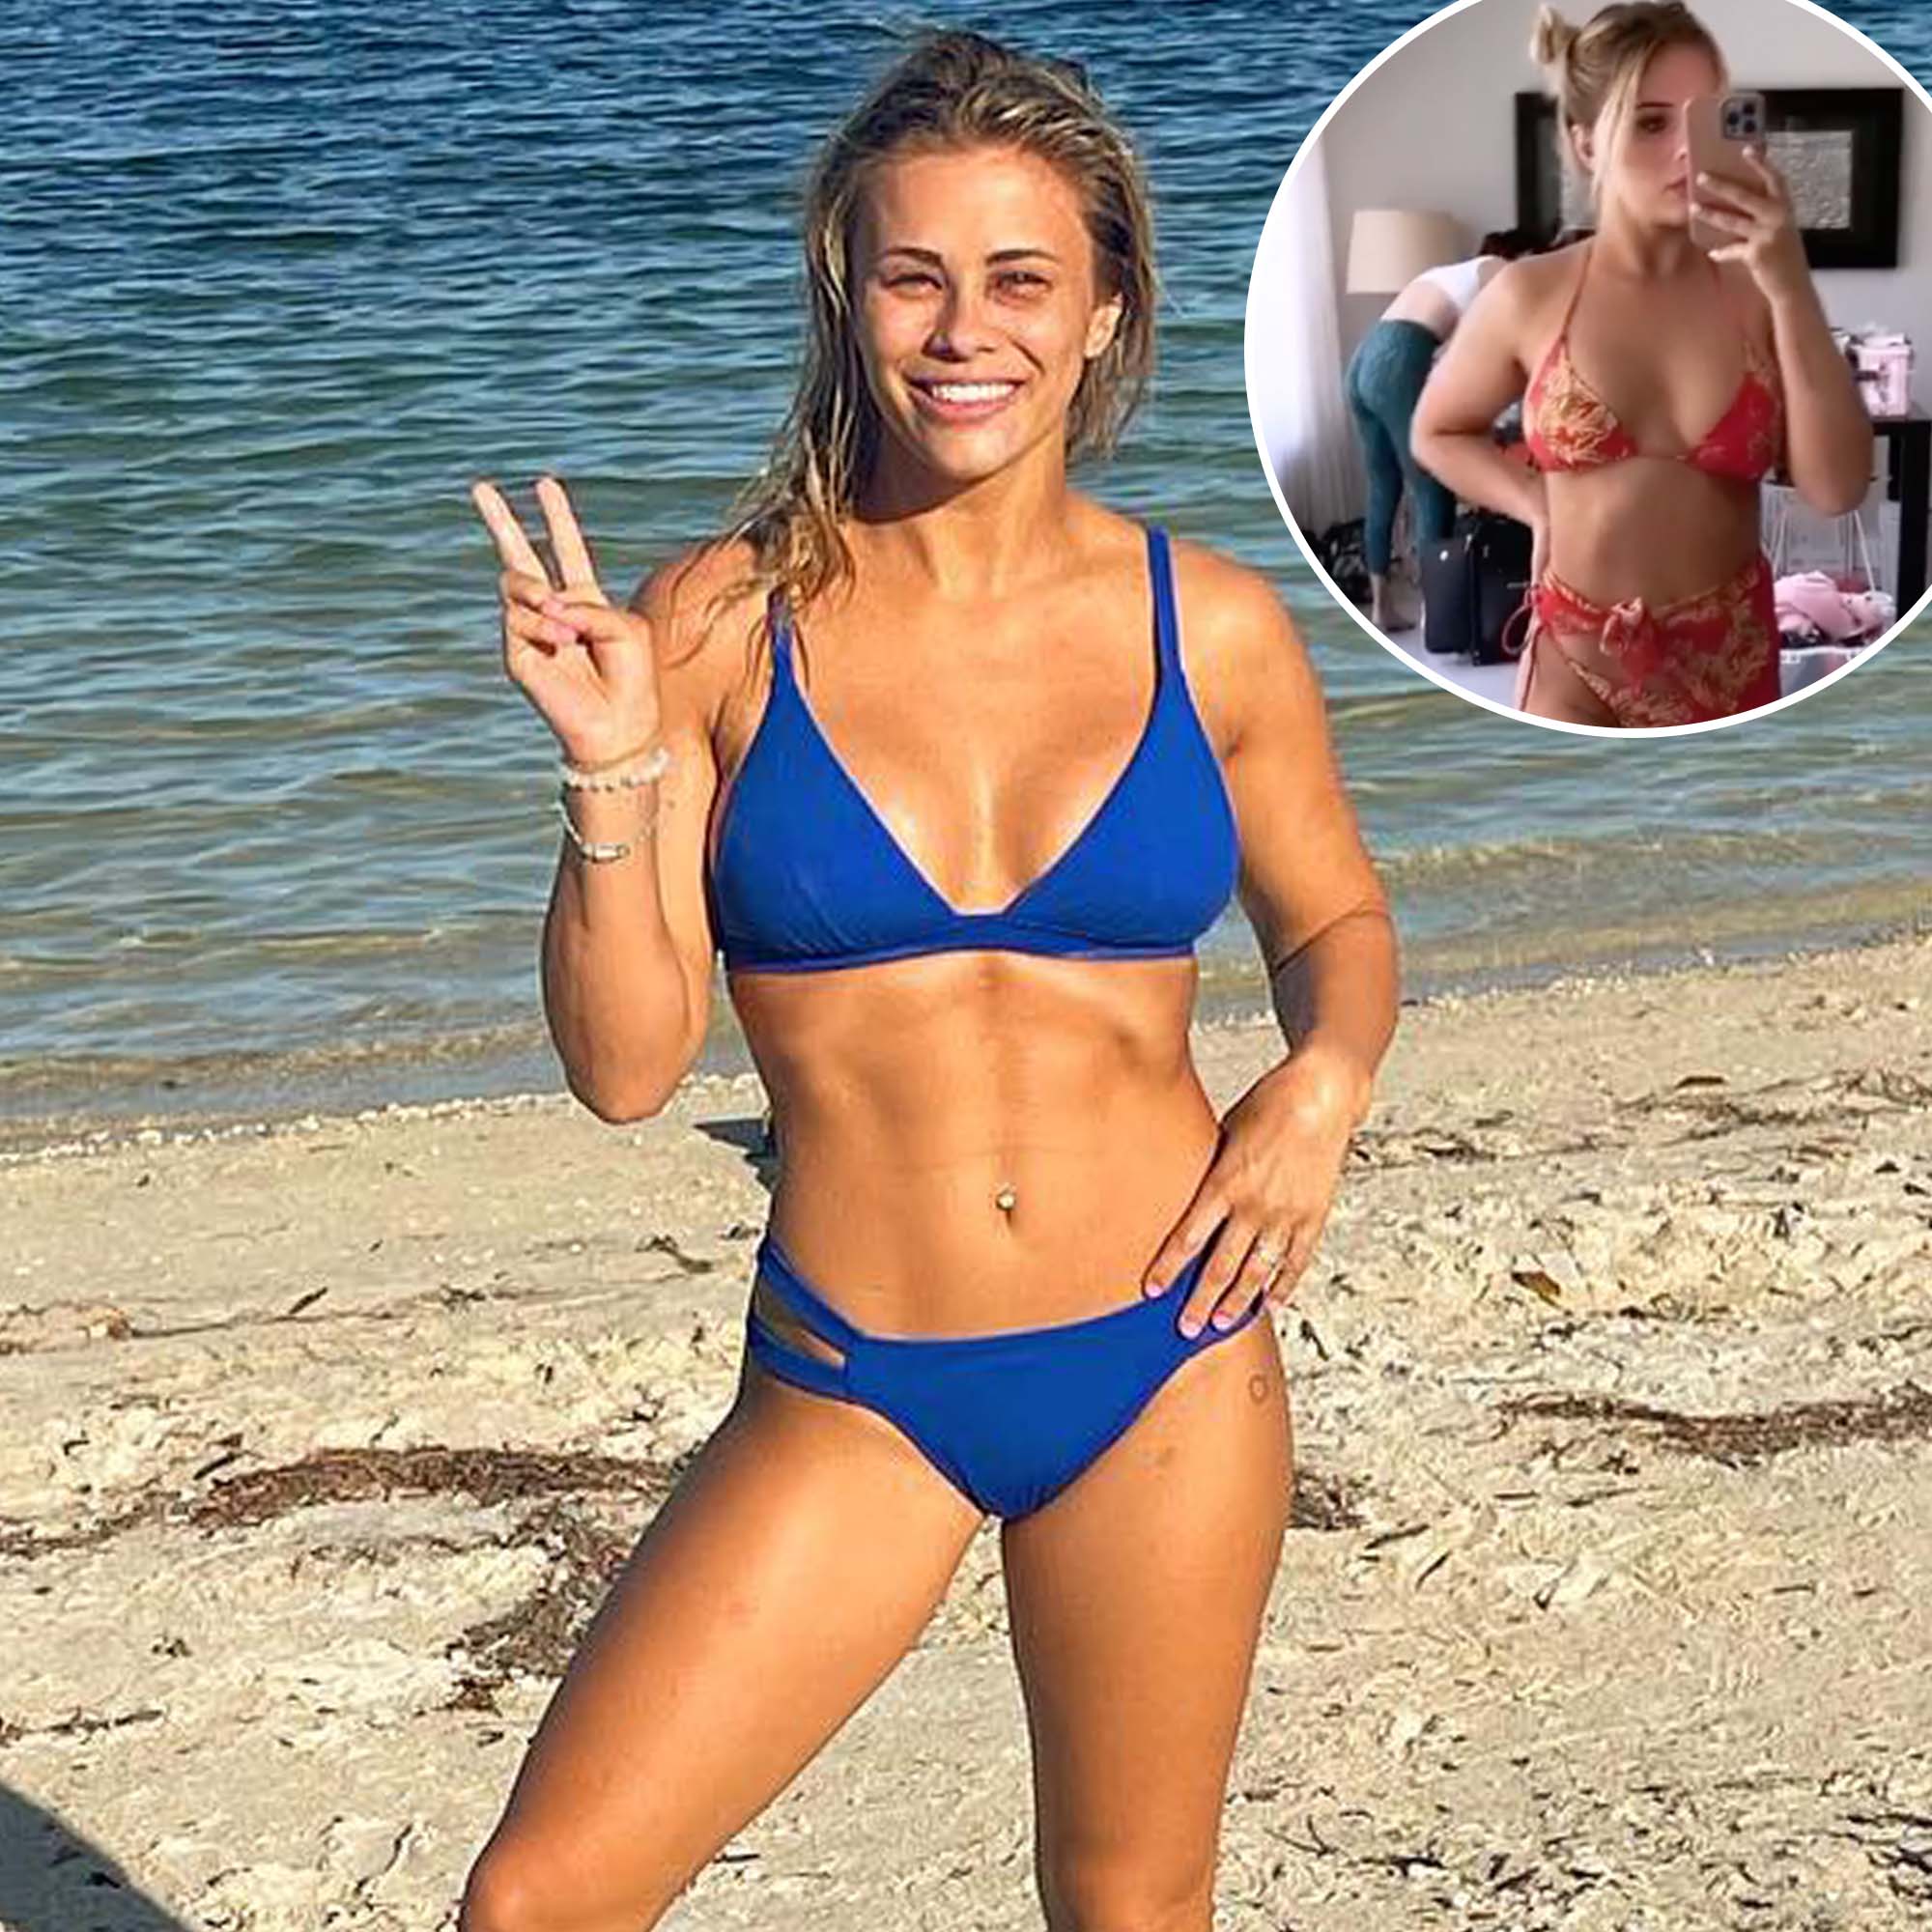 Couples Posing Naked Beach - Paige VanZant Bikini Pictures: Sexiest Swimsuit Photos